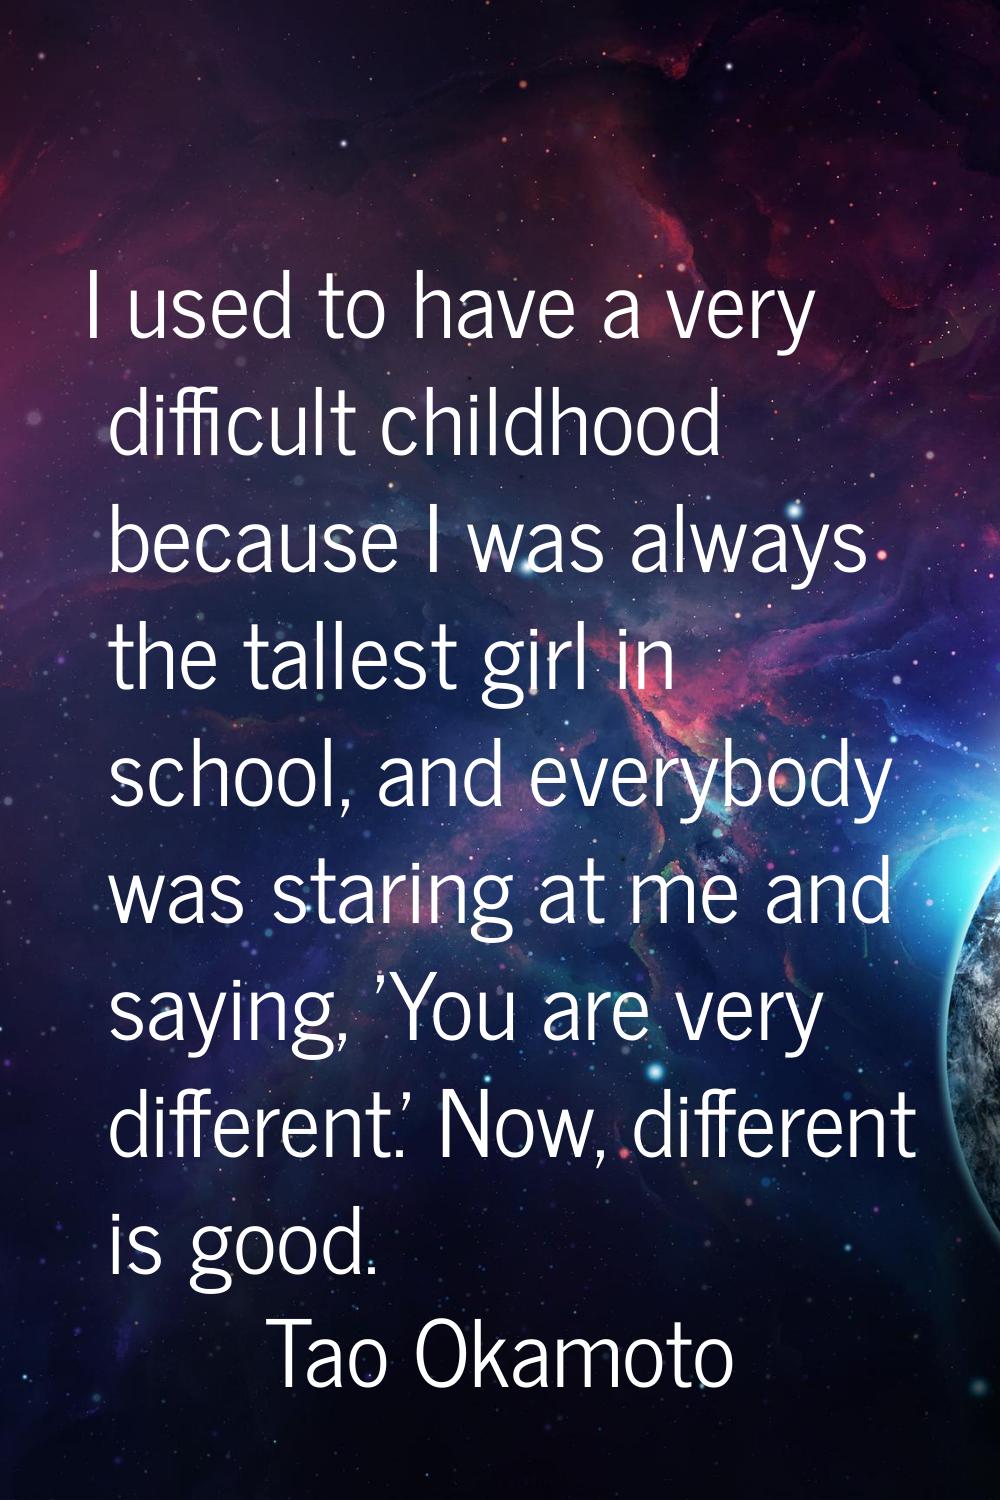 I used to have a very difficult childhood because I was always the tallest girl in school, and ever